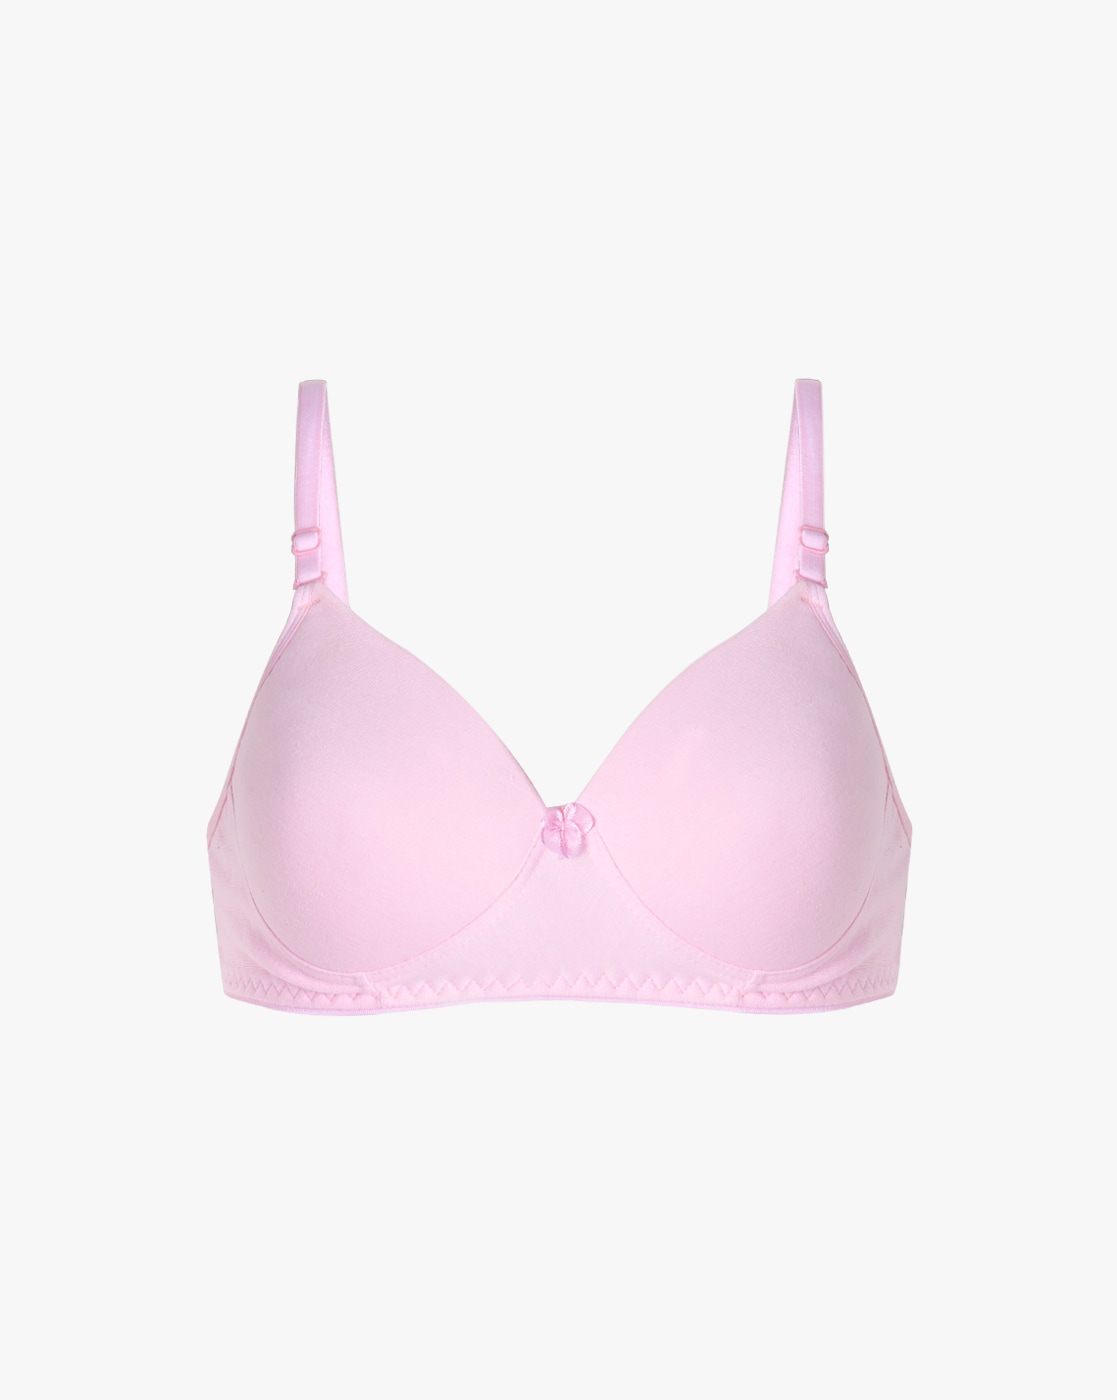 THE BENEFITS OF PADDED BRAS, 58% OFF